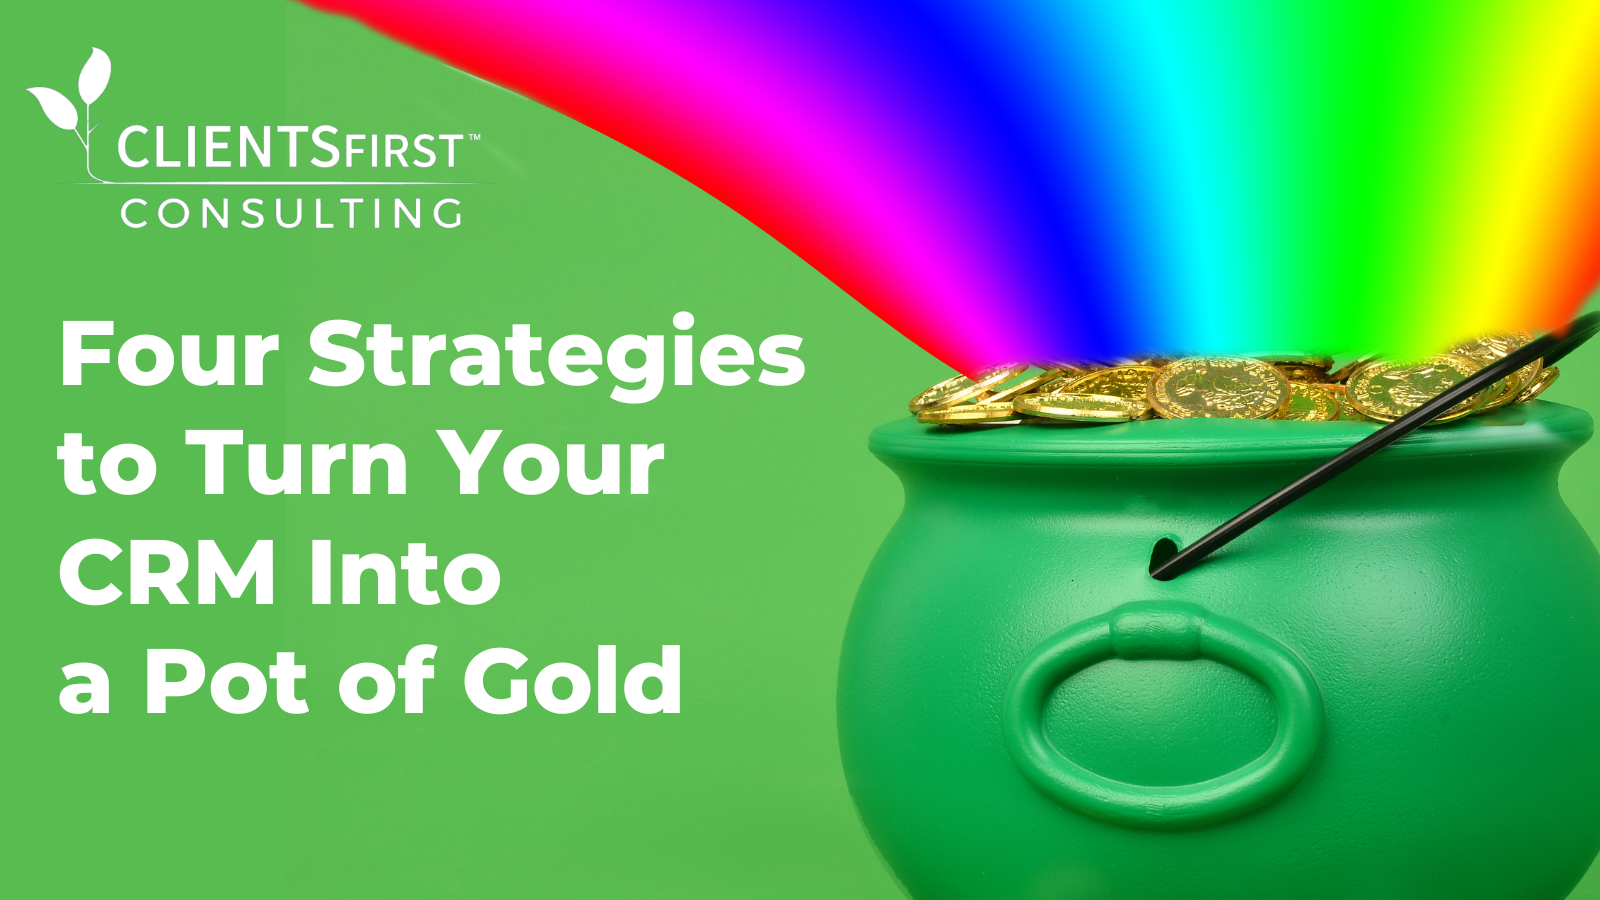 A pot of gold witha. rainbow coming out with text to the left hand side spelling out "Four Strategies to Turn Your Law Firm CRM Into a Pot of Gold"